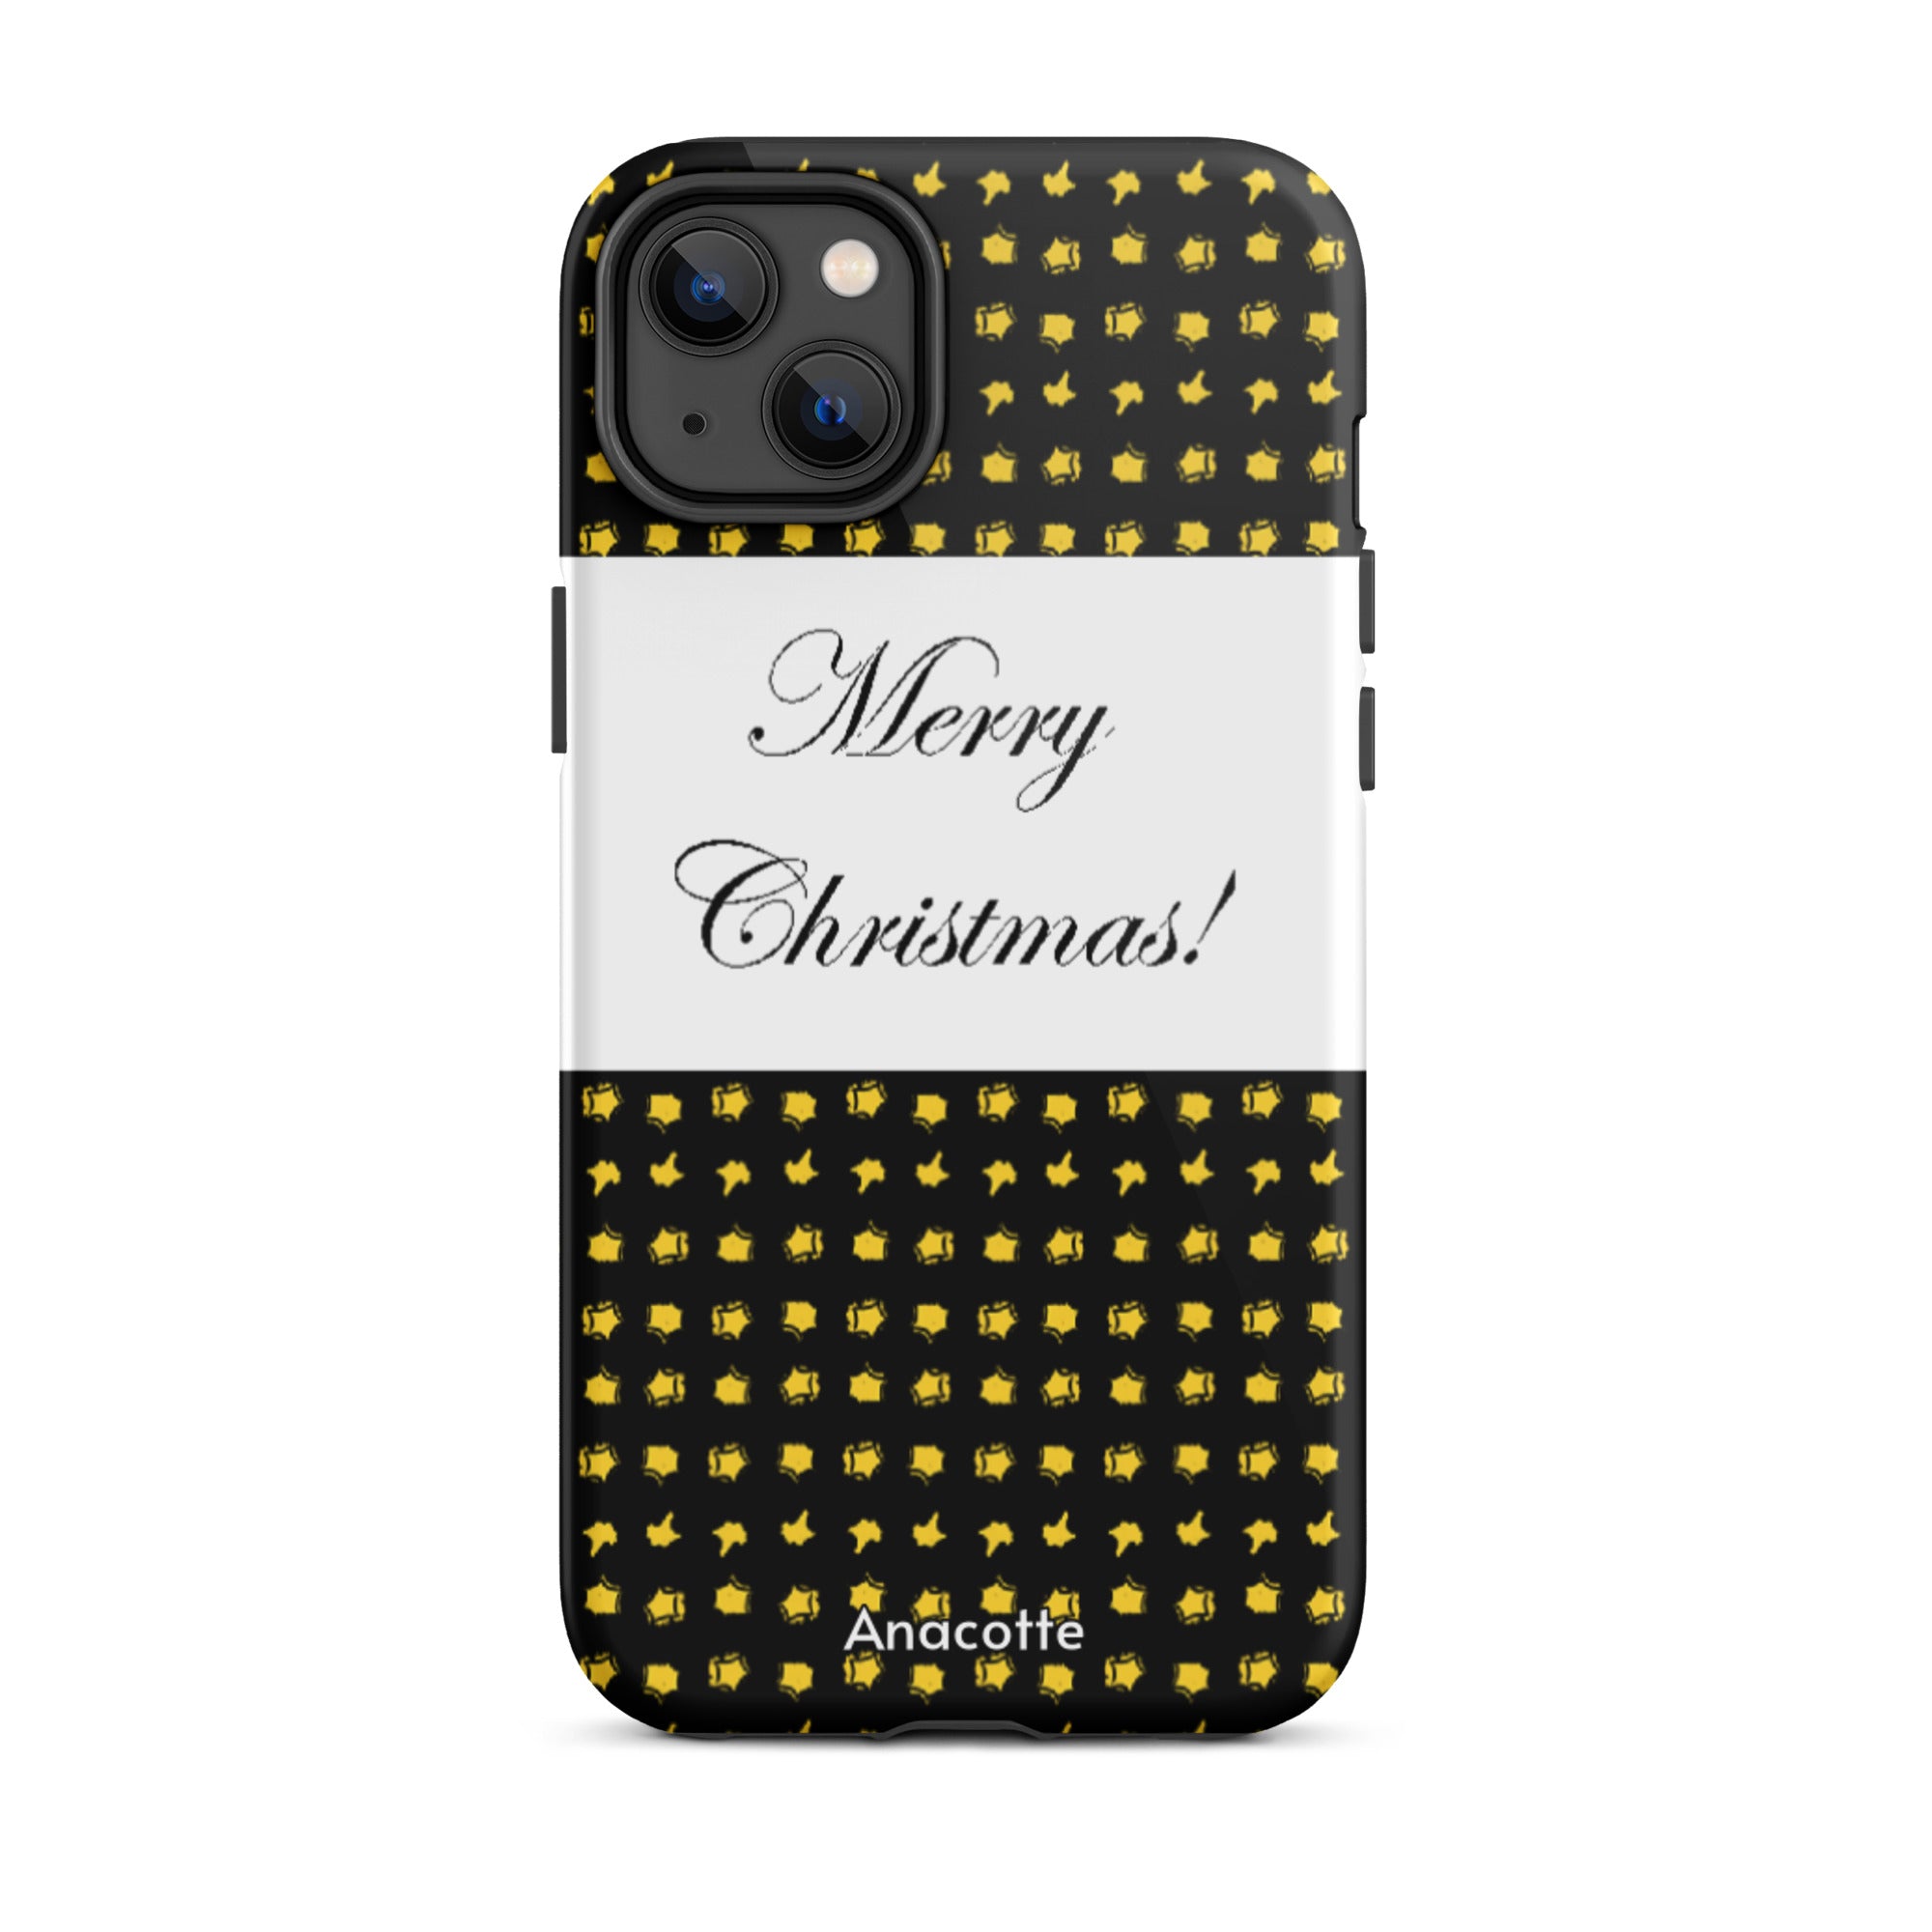 iPhone 14, 13, 12, 11 Christmas Theme iPhone Cases Star Anacotte